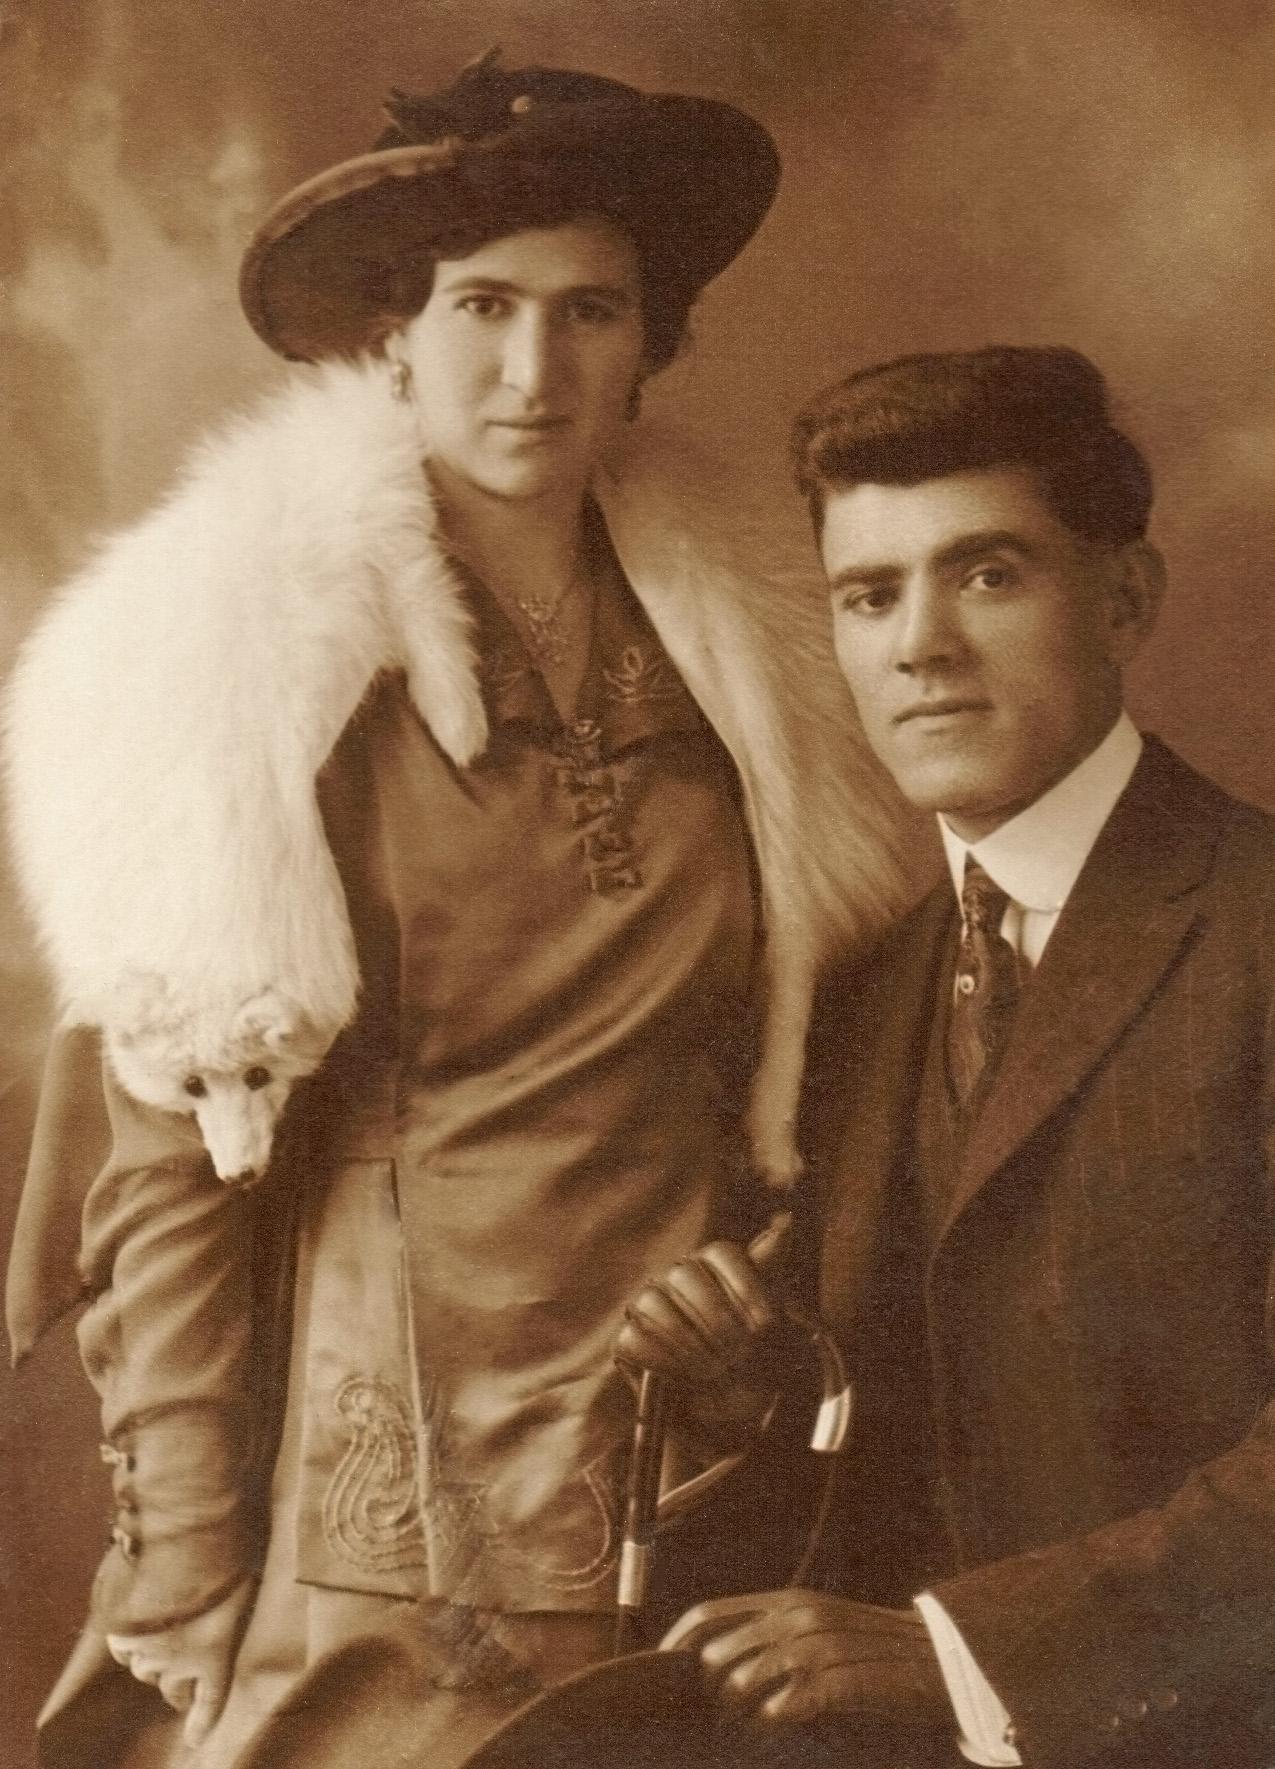 My maternal grandparents Rose and John Peshekerian were survivors of the Armenian holocaust, both having lost their parents to the Ottoman Turks. They met and married in California and later produced two daughters, one of whom was my mother. Both arrived in the United States with not much more than the clothes on their backs.

In relatively short order, though(perhaps 15 years), my grandfather became a successful San Francisco real estate broker. This photo from the 1920s (exact date unknown) is an obvious expression of them having "arrived." Both are dressed to the nines; both formally posed as husband and wife. 

Rose died of cancer in 1949, at the age of 56. John lived to be 93 years old and passed away, alone, in 1976 in San Francisco, never having remarried. View full size. 